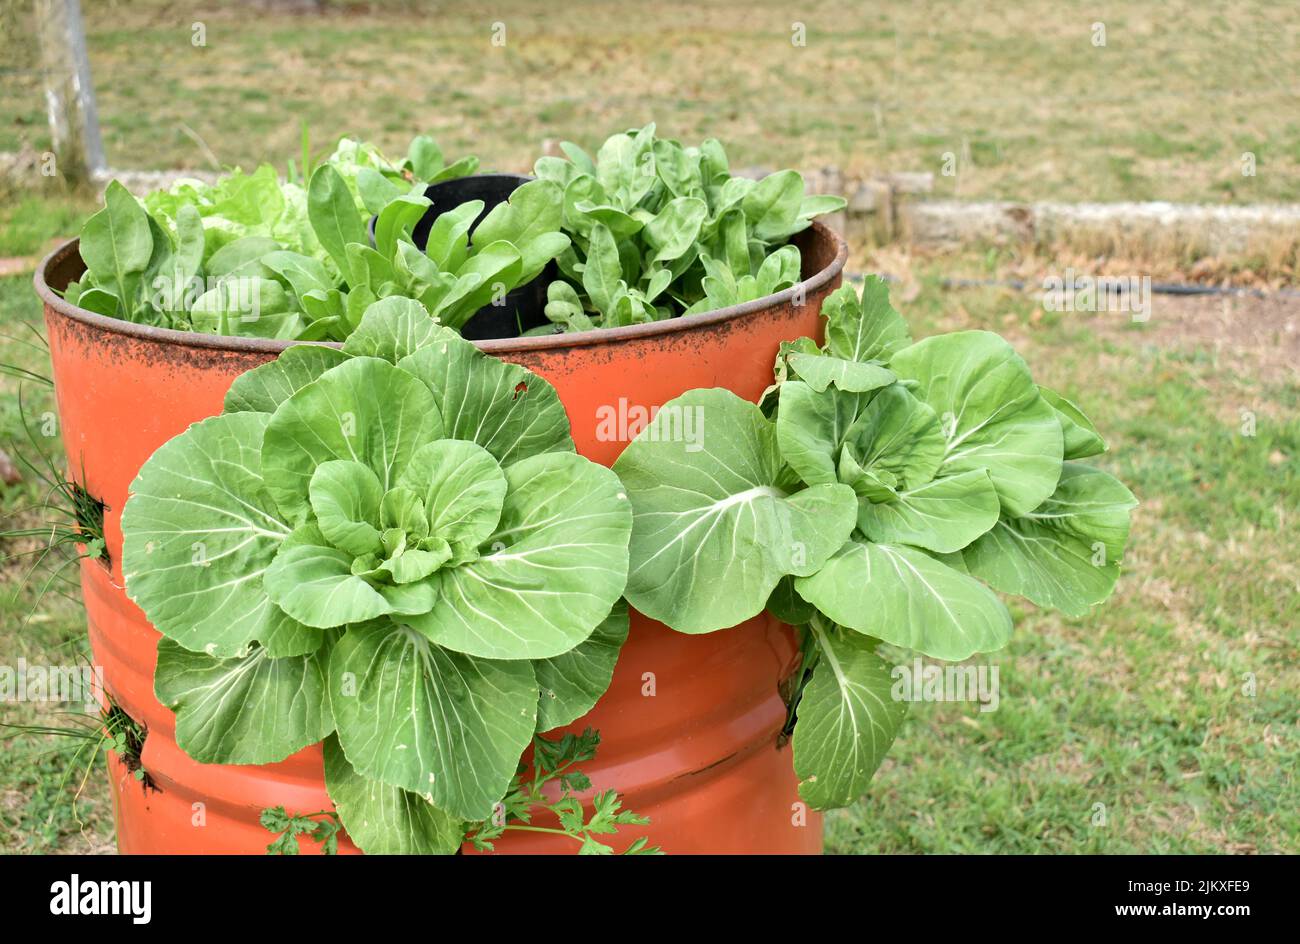 Cabbage lettuce produced in an agroecological garden Stock Photo